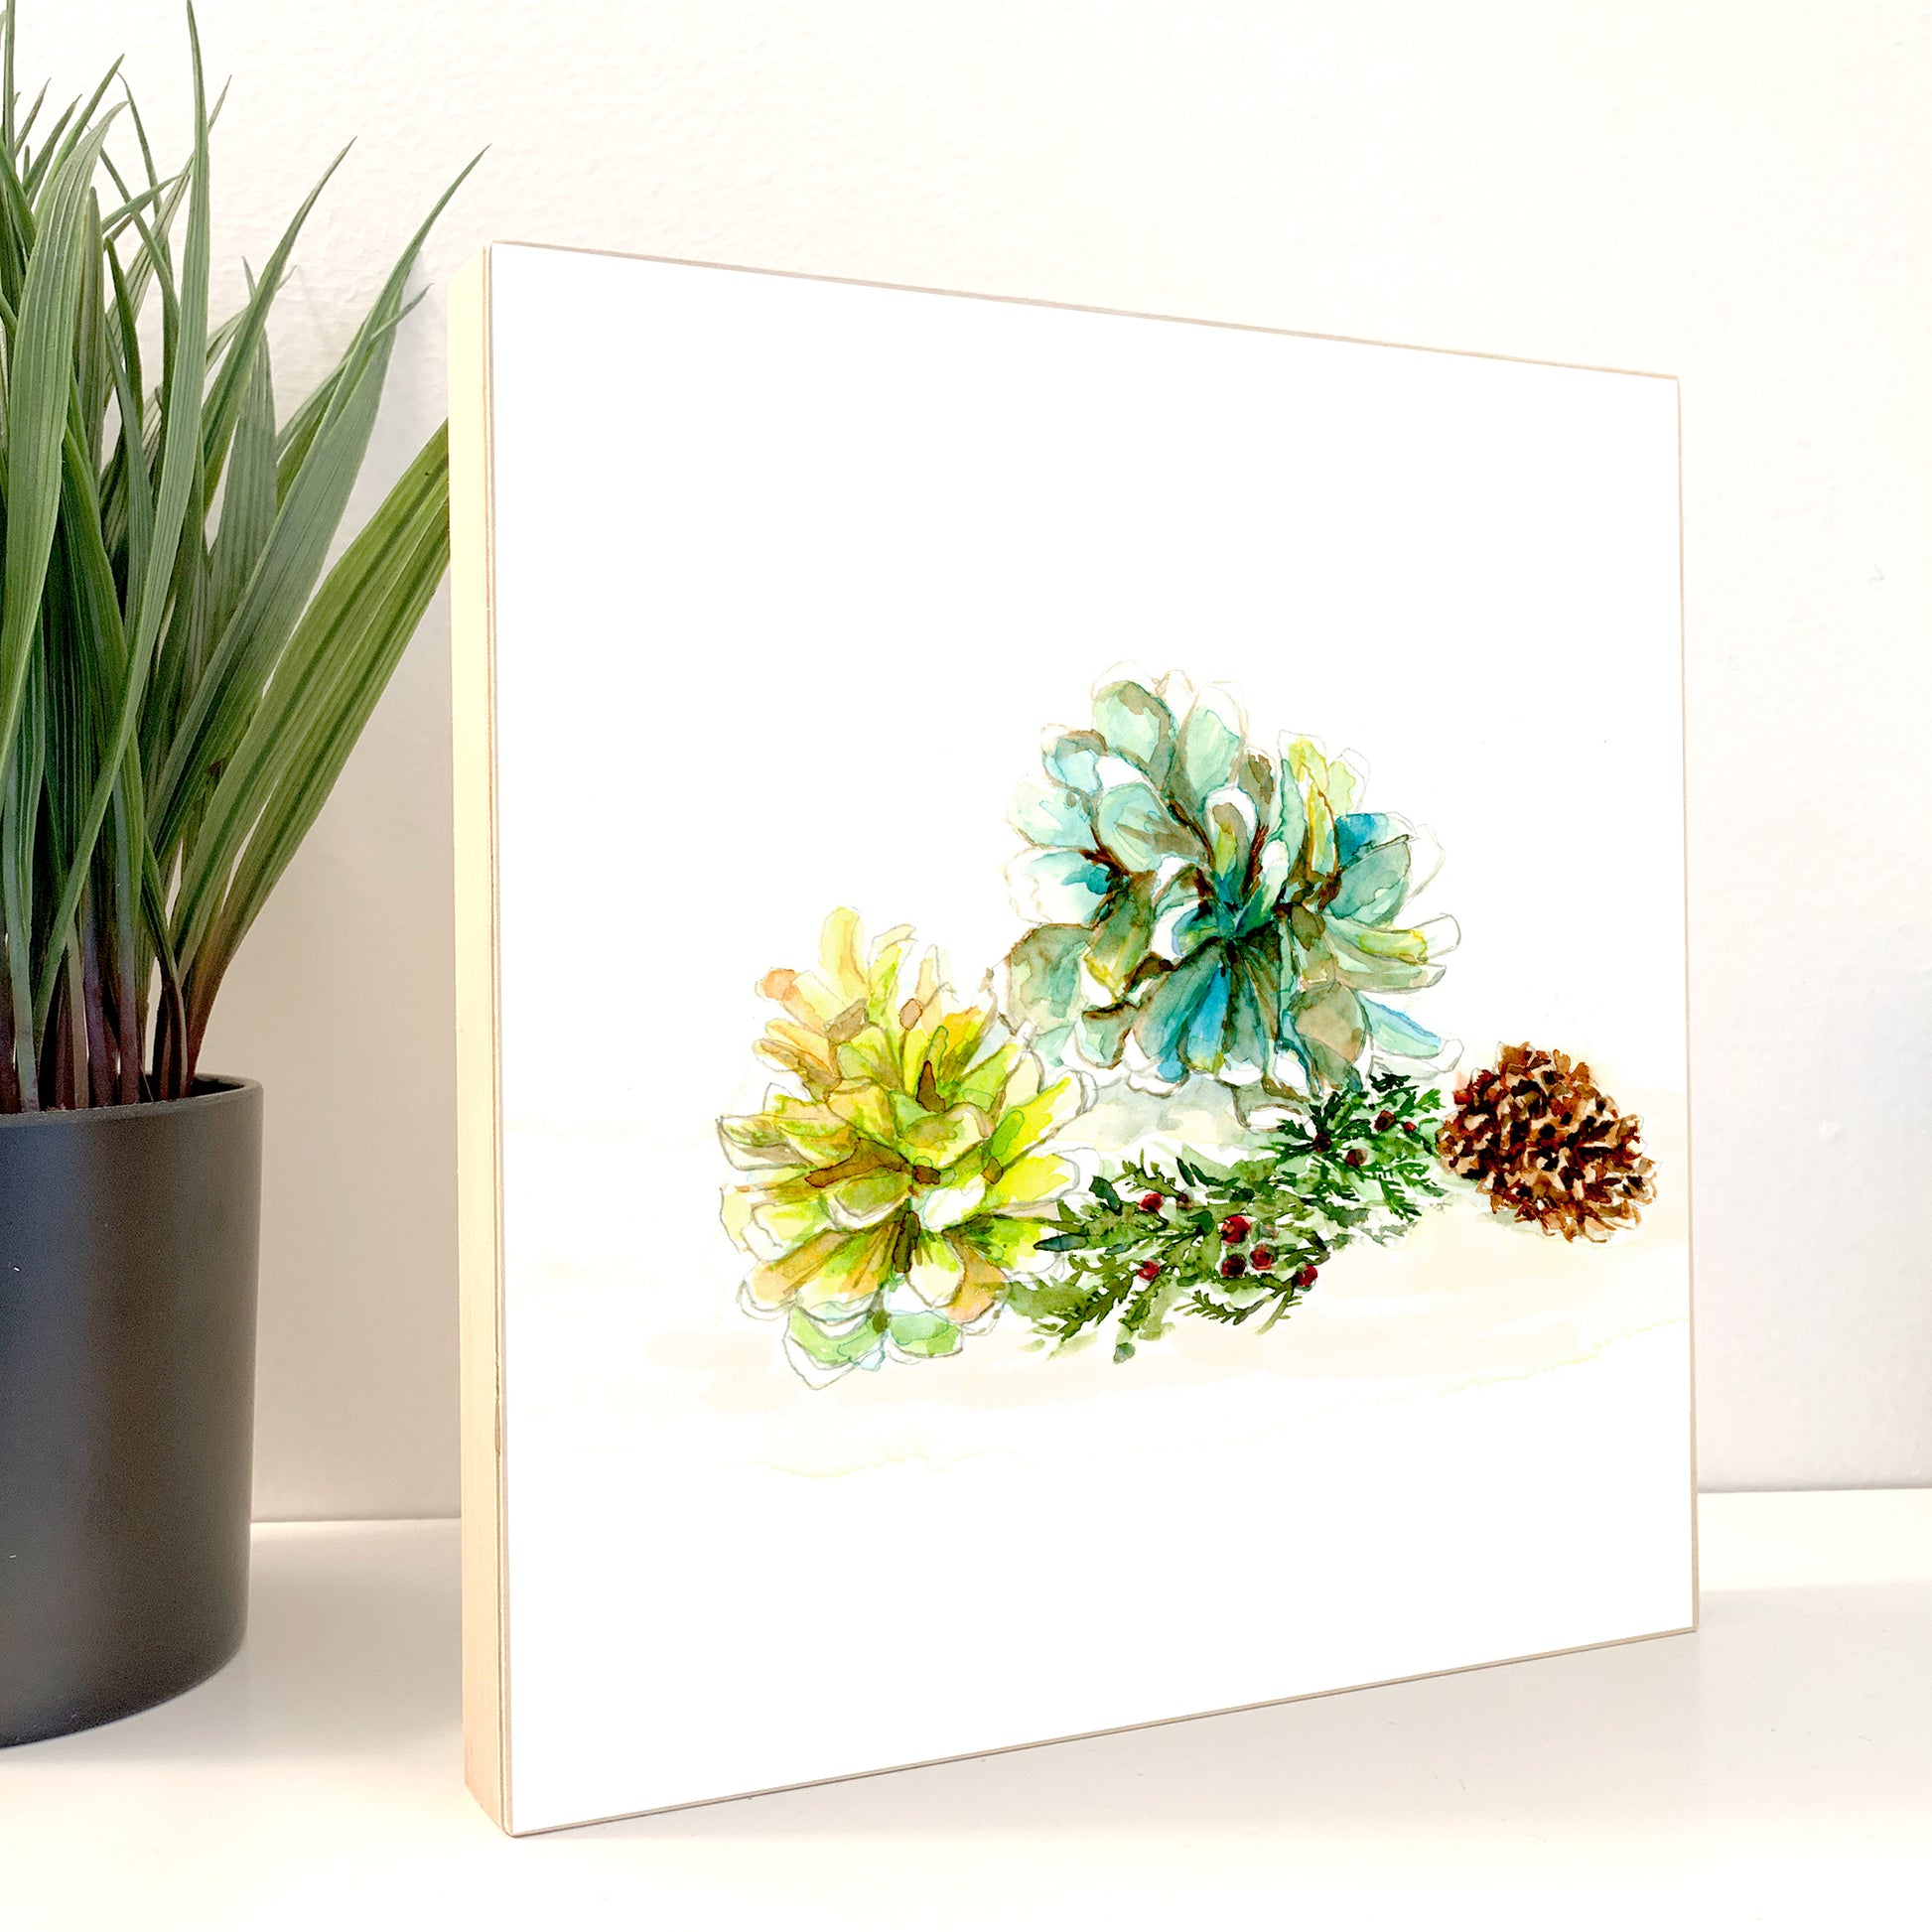 CHRISTMAS - Beach Pine Cones on Wood Block 5x5 or 8x8. Original Watercolor Painting - Flamingo Shores - Original Art for Home Decor and Gifts